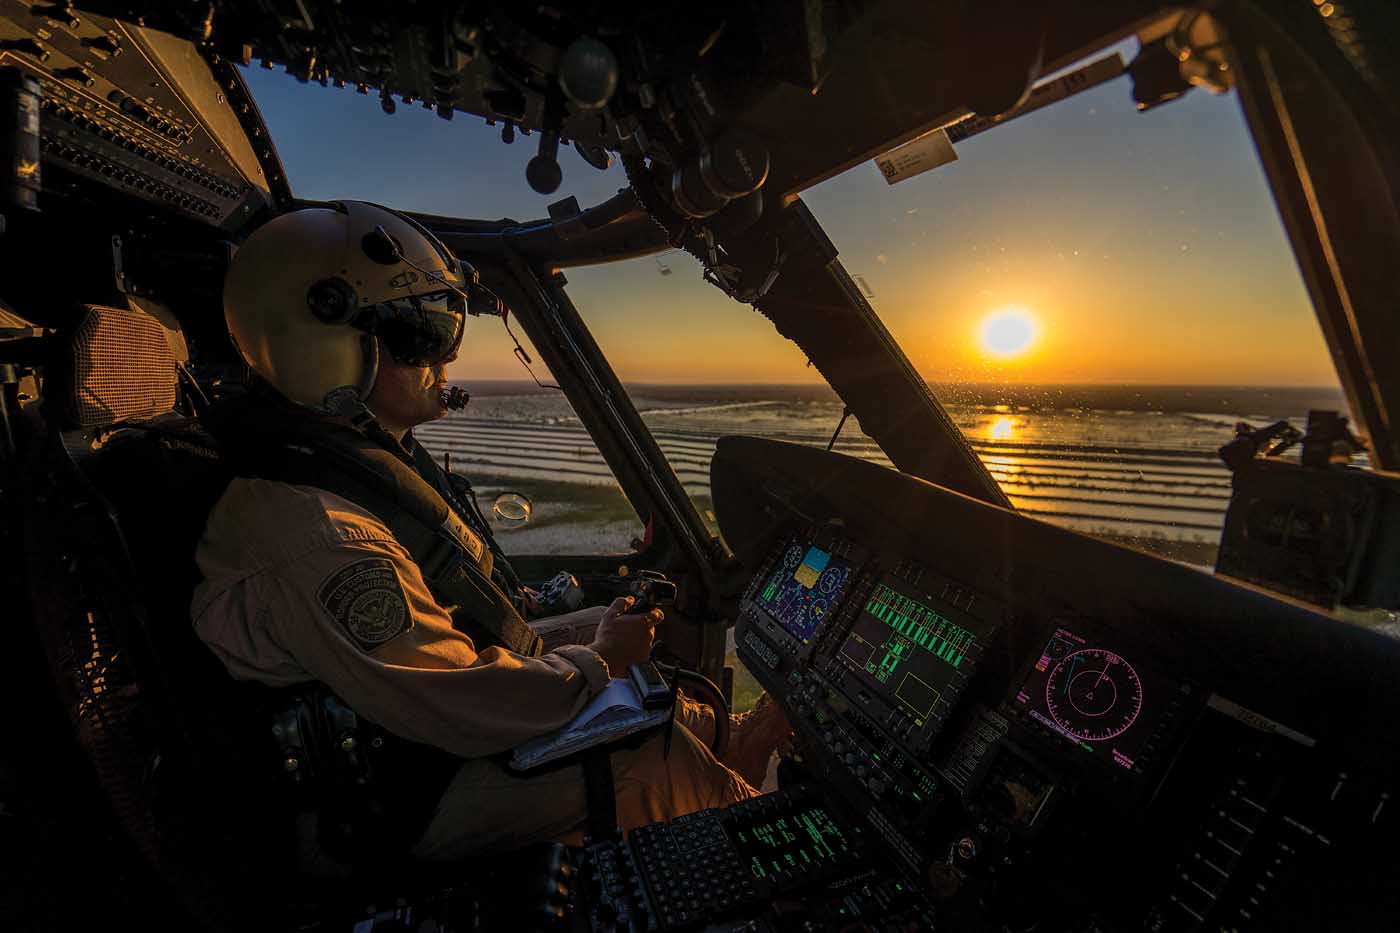 The CBP’s Air and Marine Operations has a fleet of around 240 aircraft, including six different helicopter types — providing plenty of opportunities for pilots to transition between aircraft if they so choose. Edwin Montufar Photo